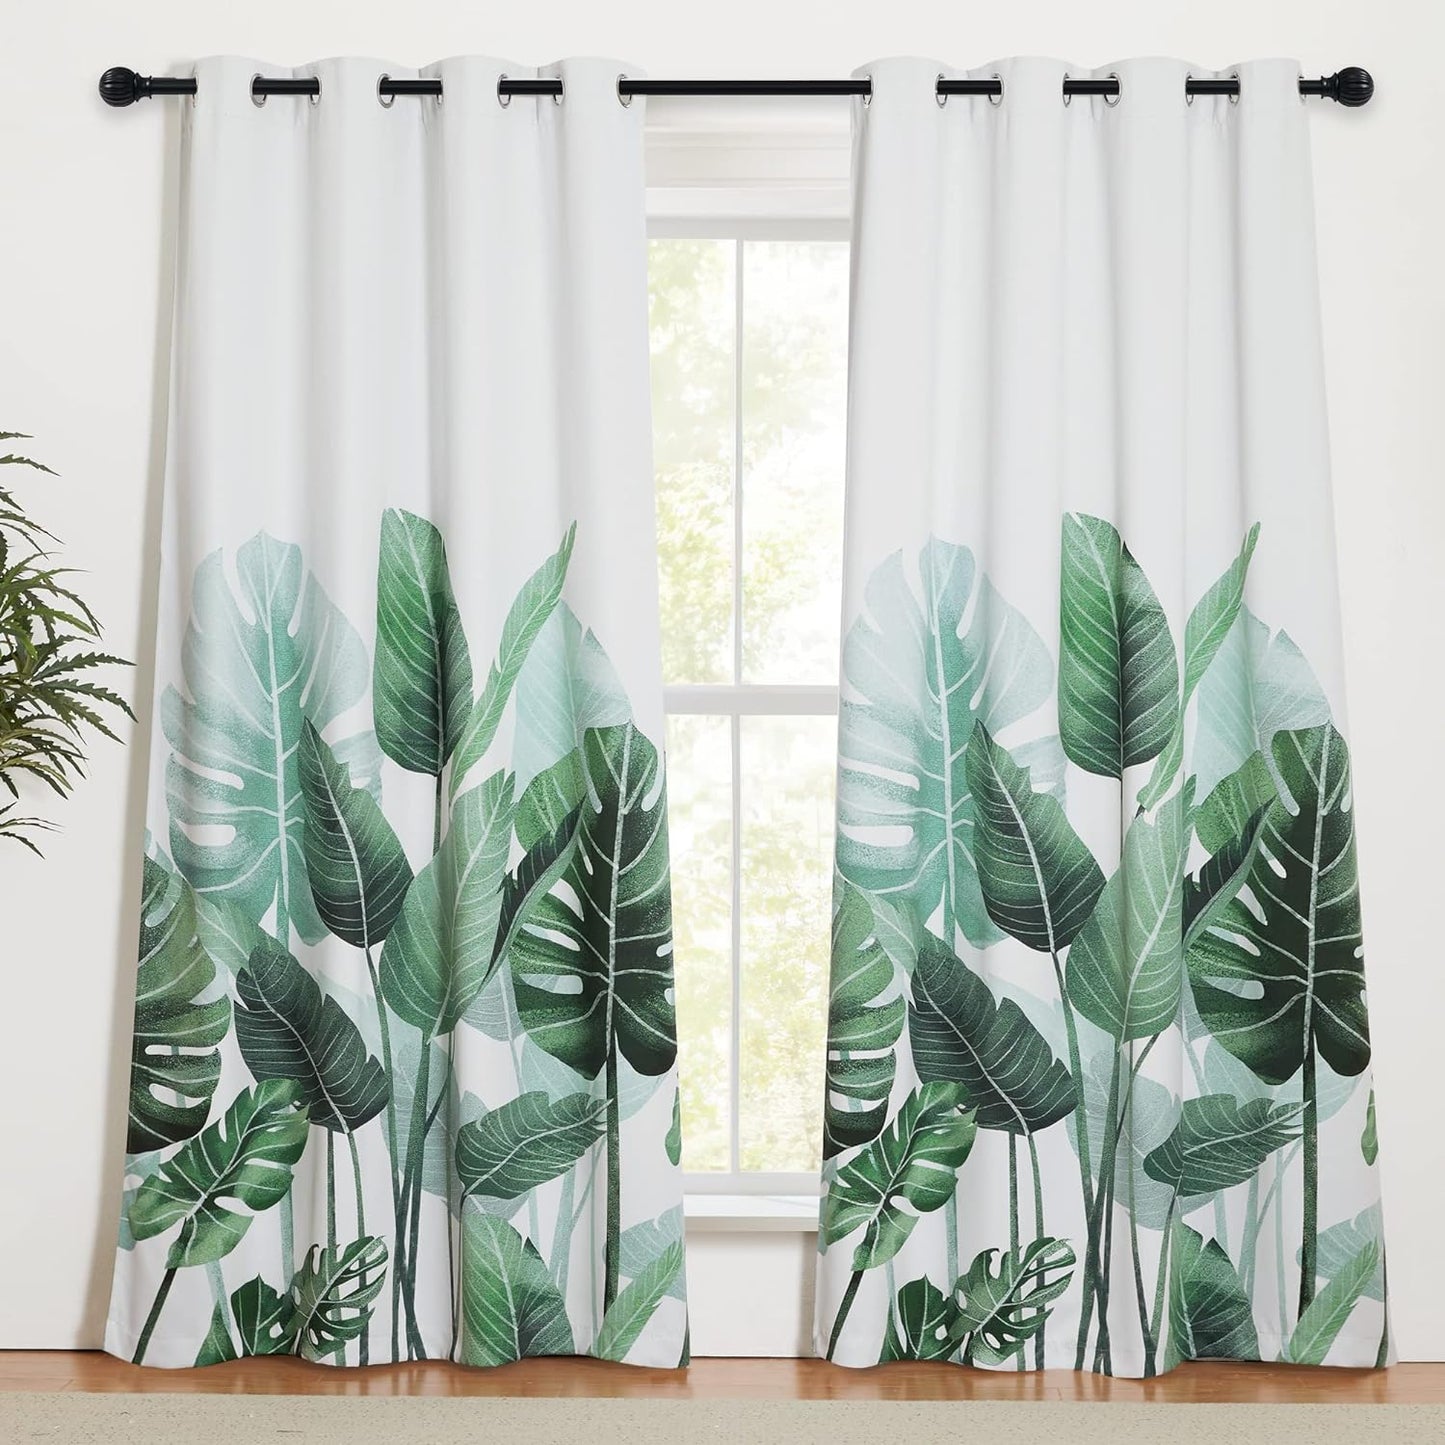 KGORGE Blackout Curtains for Bedroom, Farmhouse Tripical Leaves Pattern Curtains & Drapes Insulating Privacy Window Treatment for Dining Living Room Office Studio, W52 X L63 Inch, 2 Panels  KGORGE Polyester W52 X L84 | Pair 